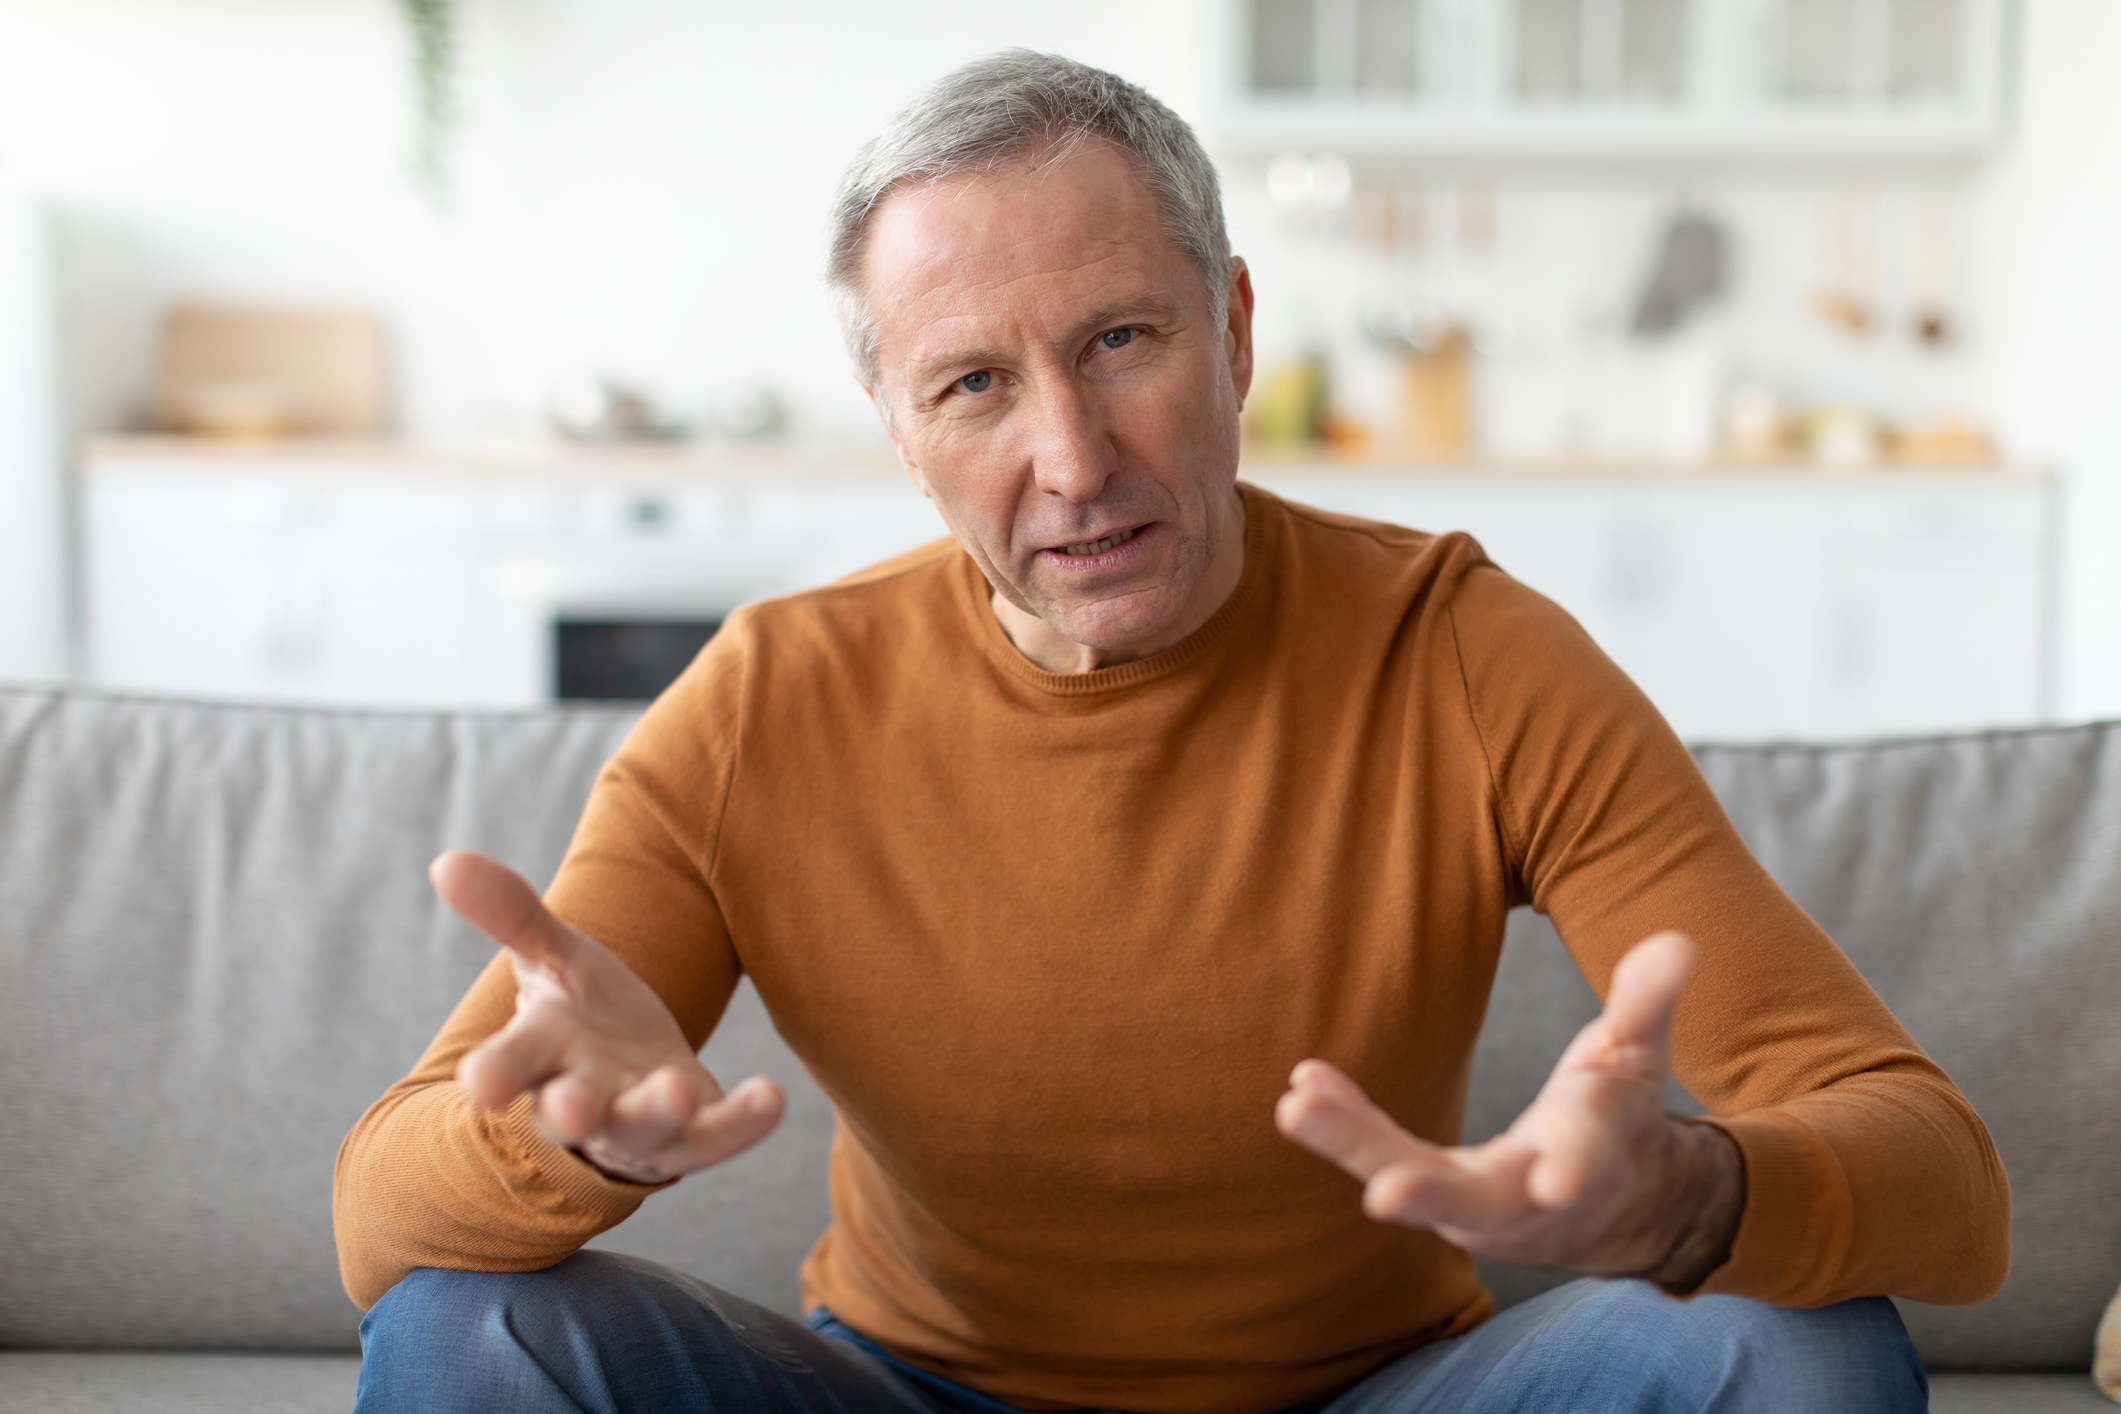 Stock image of older man sitting on couch speaking to camera. His hands are outstretched like he is talking with his hands